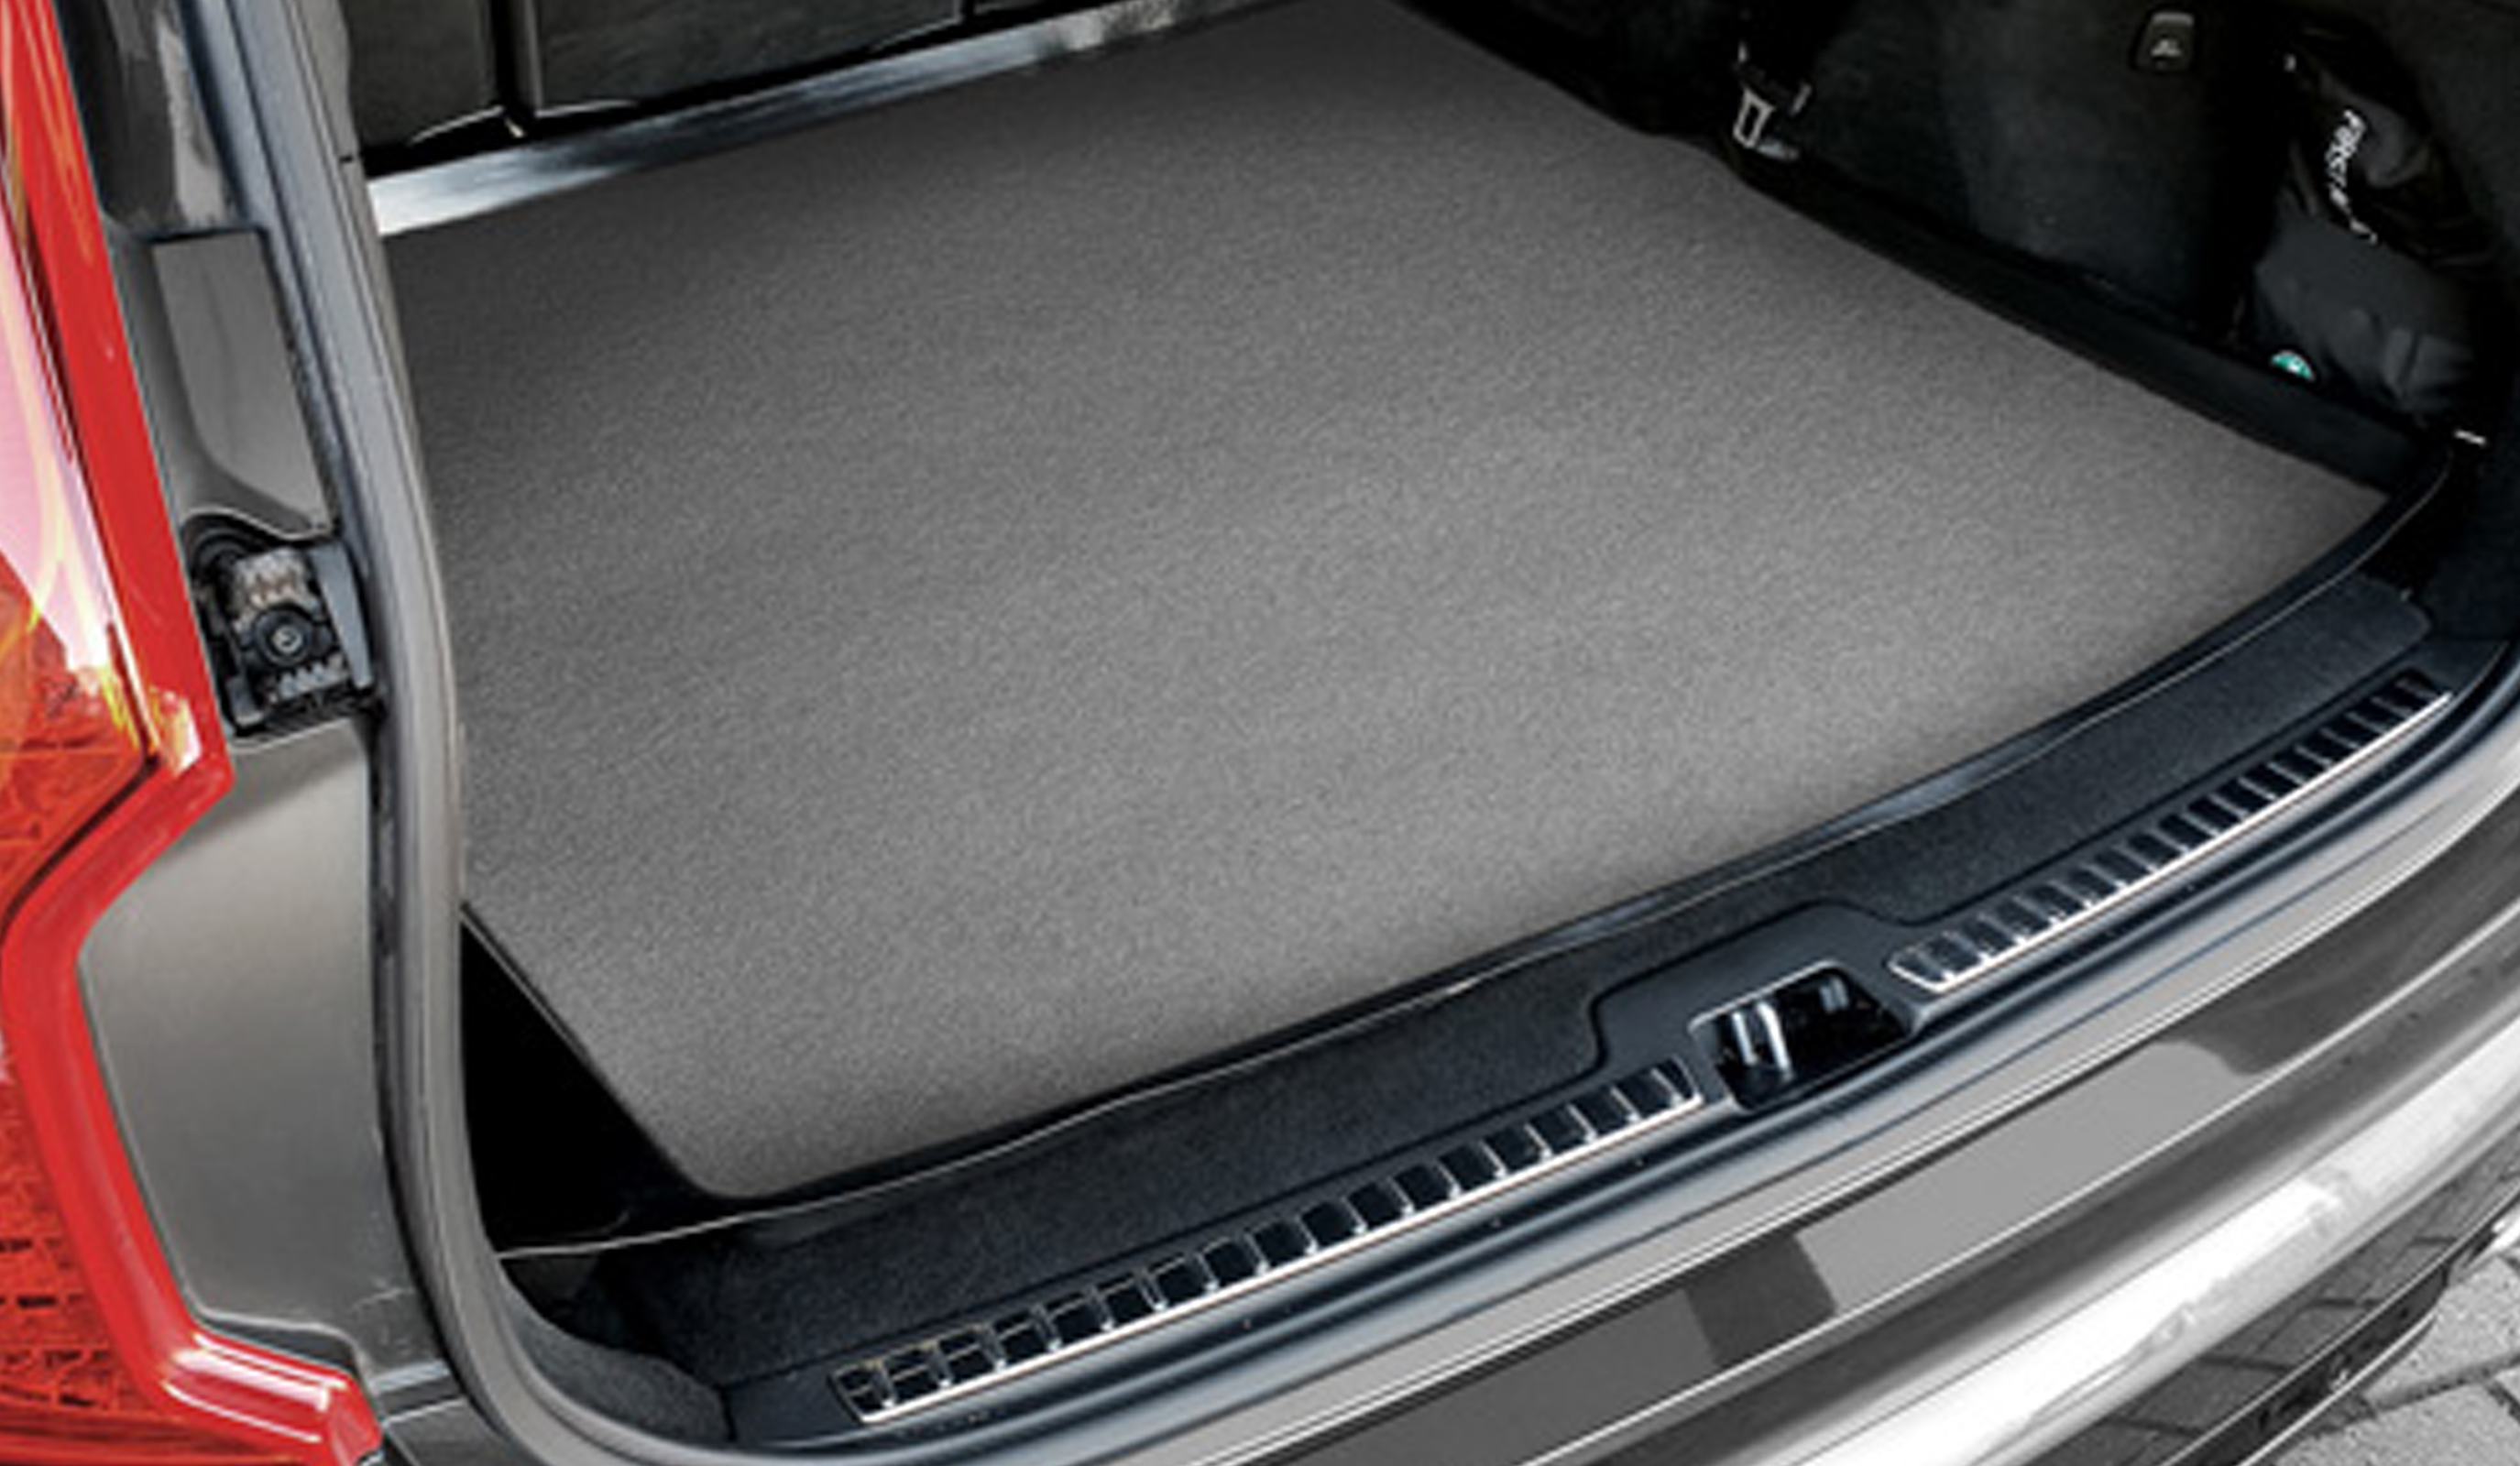 carmats4u Tailored Boot Liner/Tray/Mat for Altea 2004-2015 bottom standard trunk with Removable Anti-Slip Black Carpet 